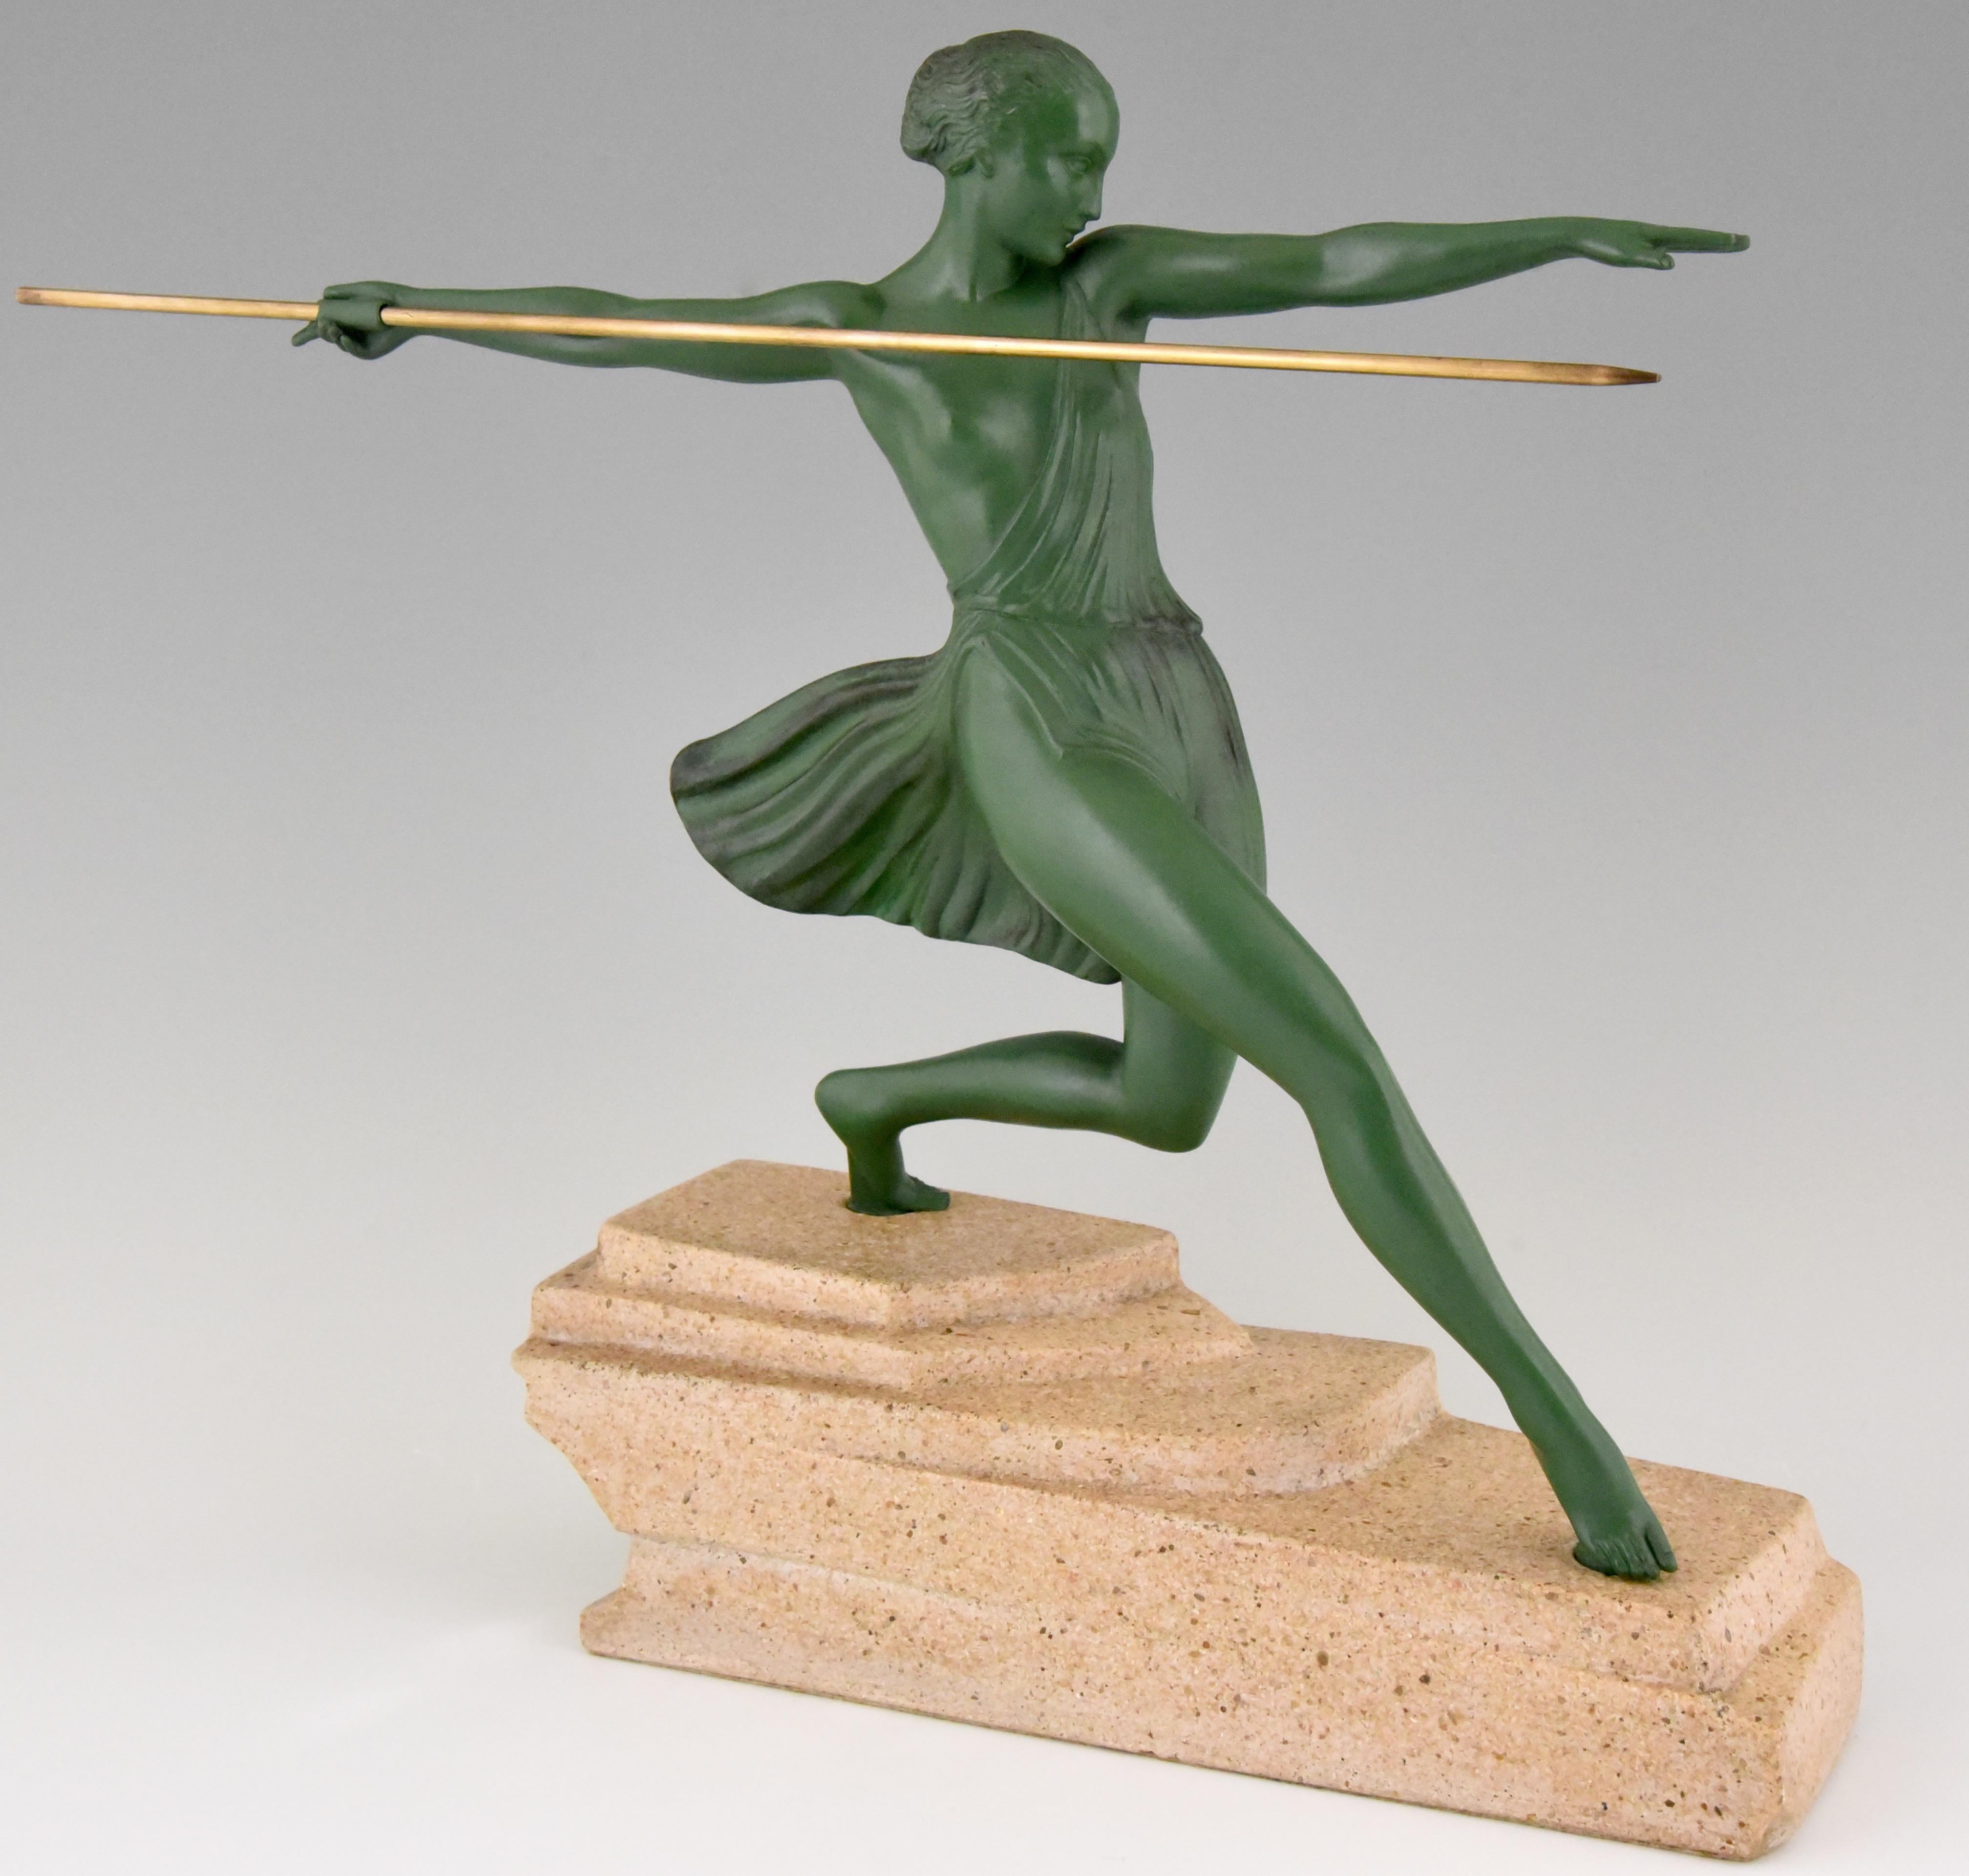 Hard to find Art Deco sculpture of a female javelin thrower by Fayral, the pseudonym of Pierre Le Faguays. The sculpture is in Art metal and has a lovely green patina. The figure stands on a signed stone base and was created in France, circa